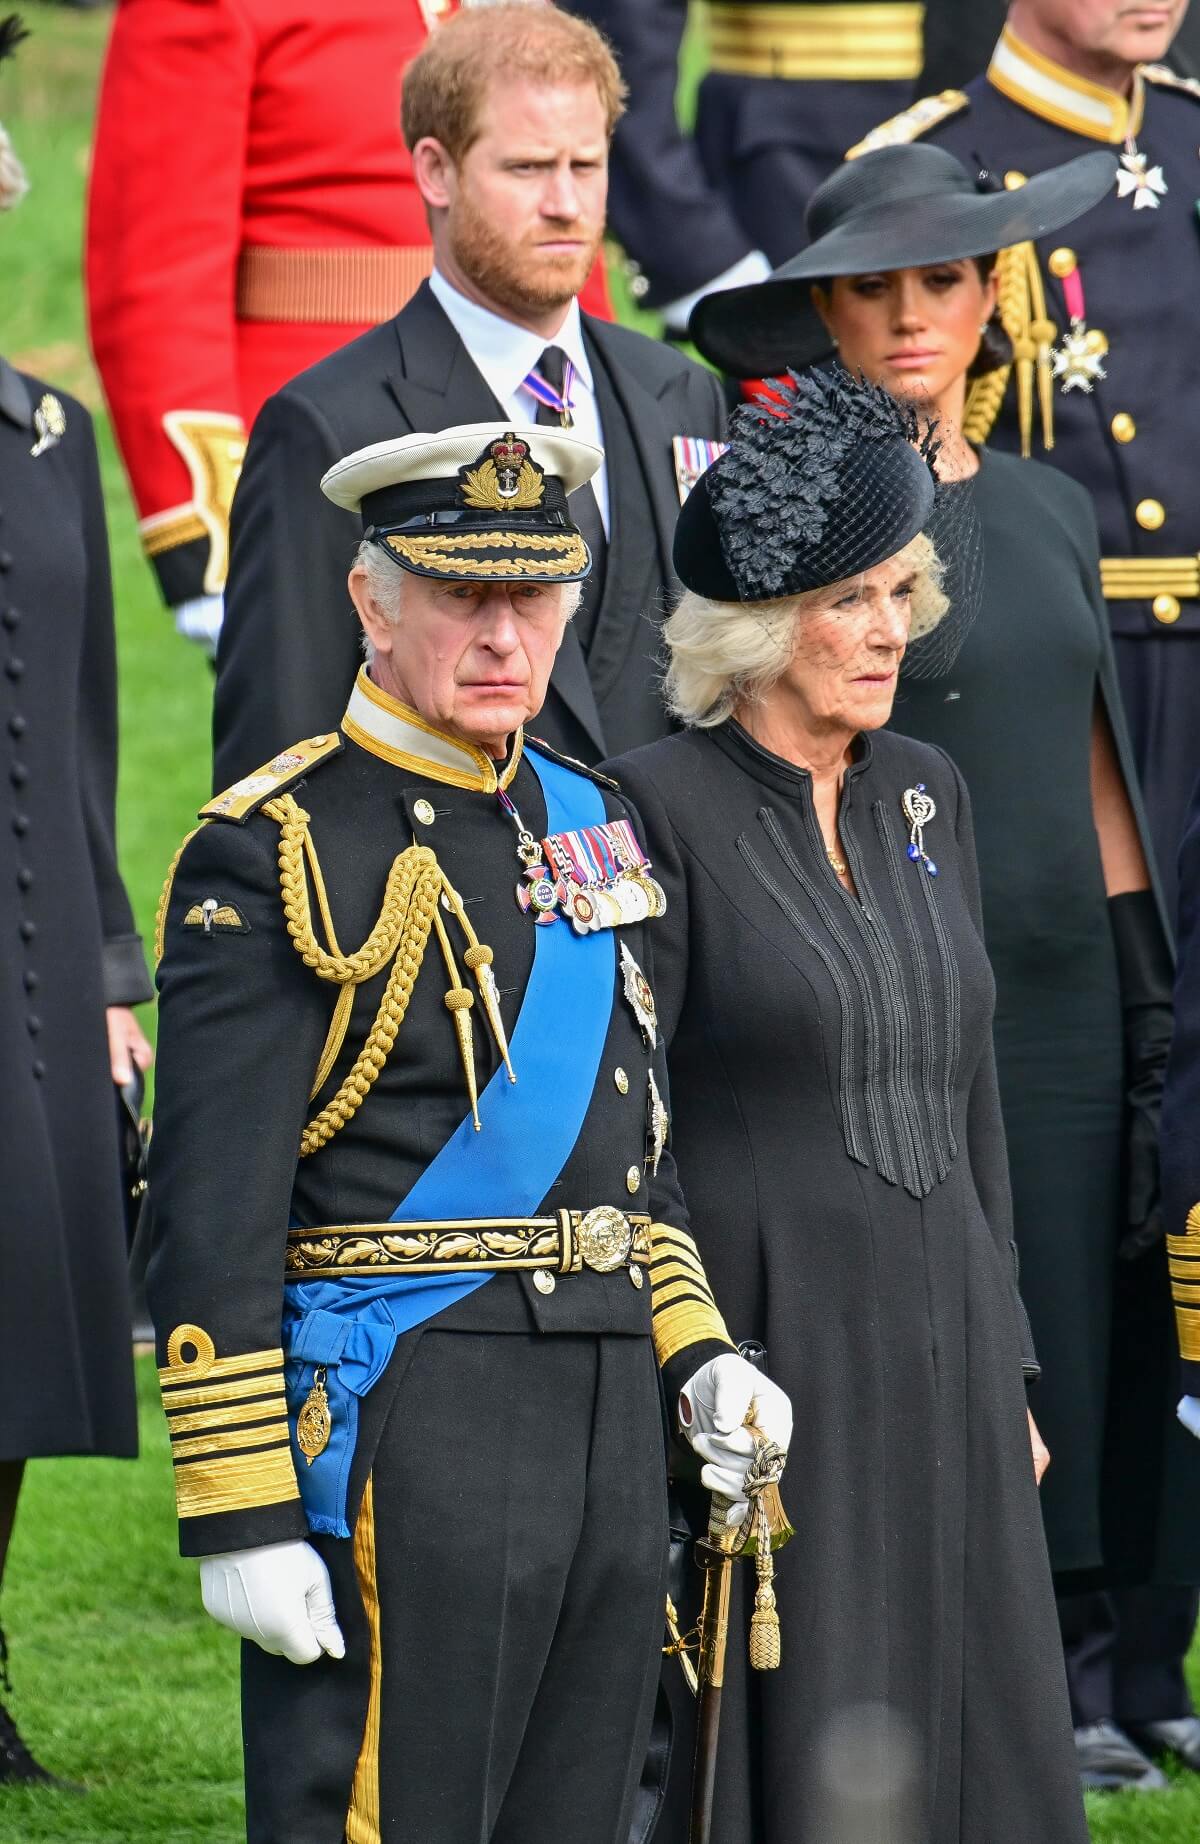 Prince Harry, Meghan Markle, King Charles III and Camilla Parker Bowles observe the coffin of Queen Elizabeth II as it is transferred from the gun carriage